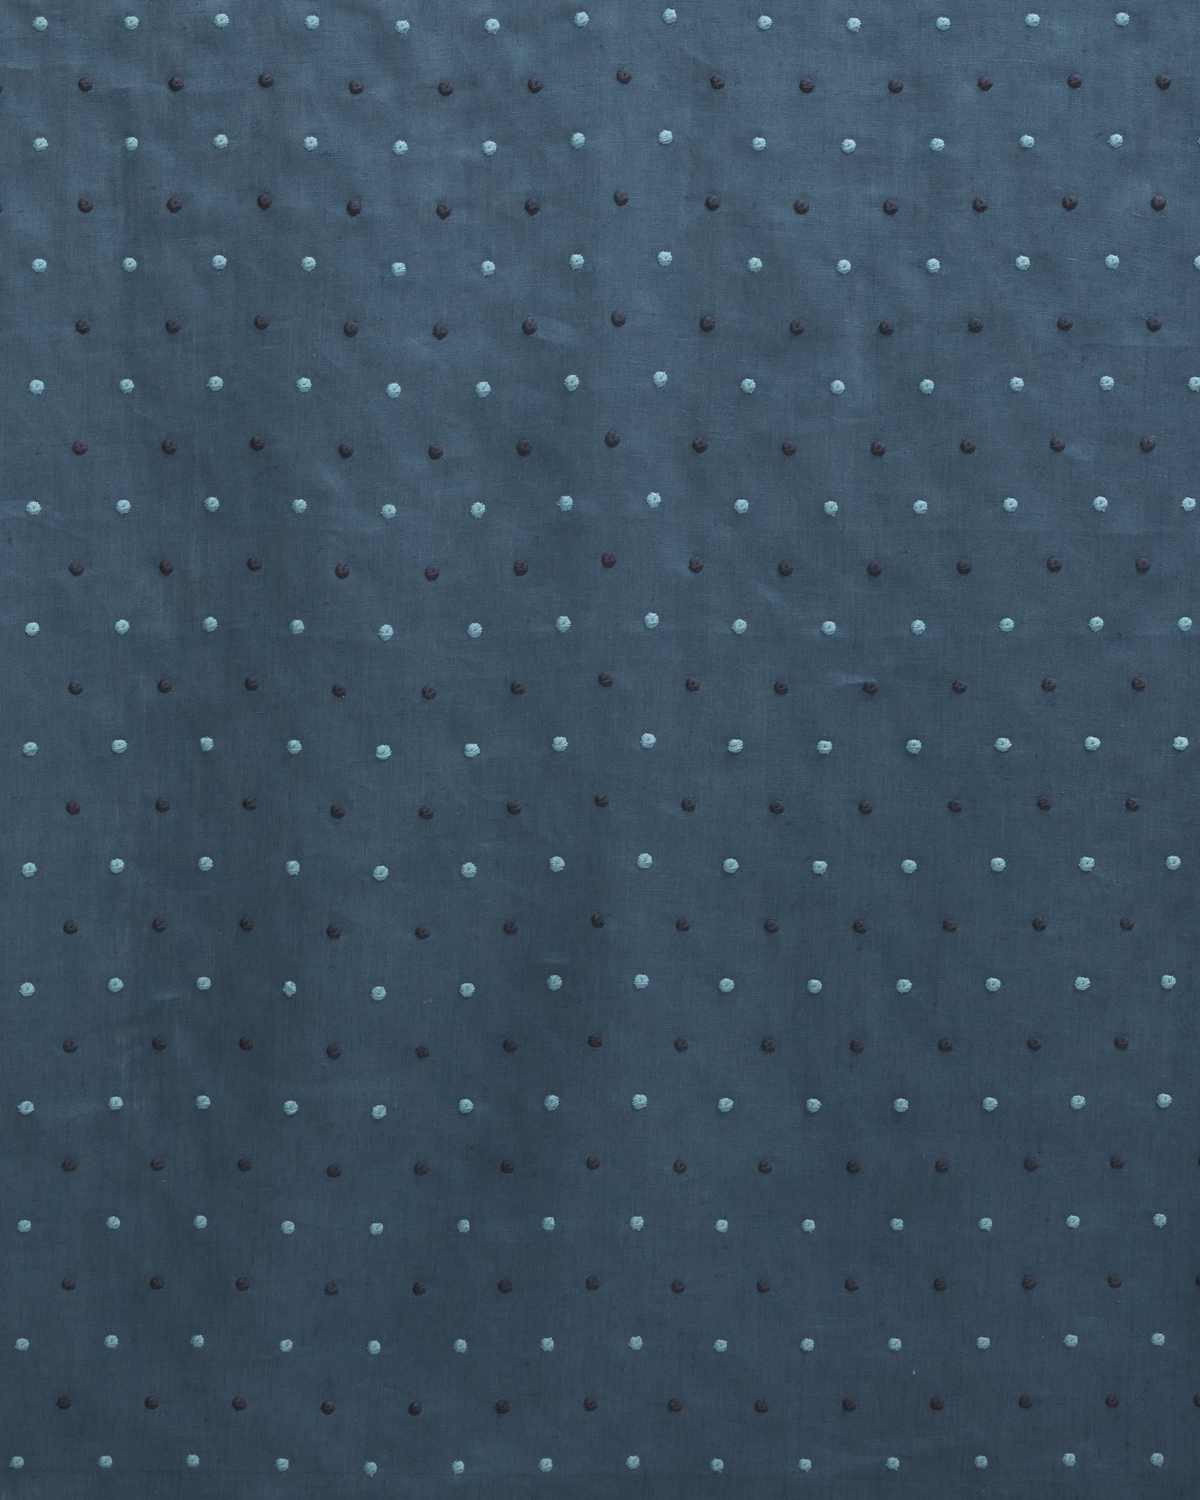 Embroidered Dots Sheer Fabric in Washed Navy